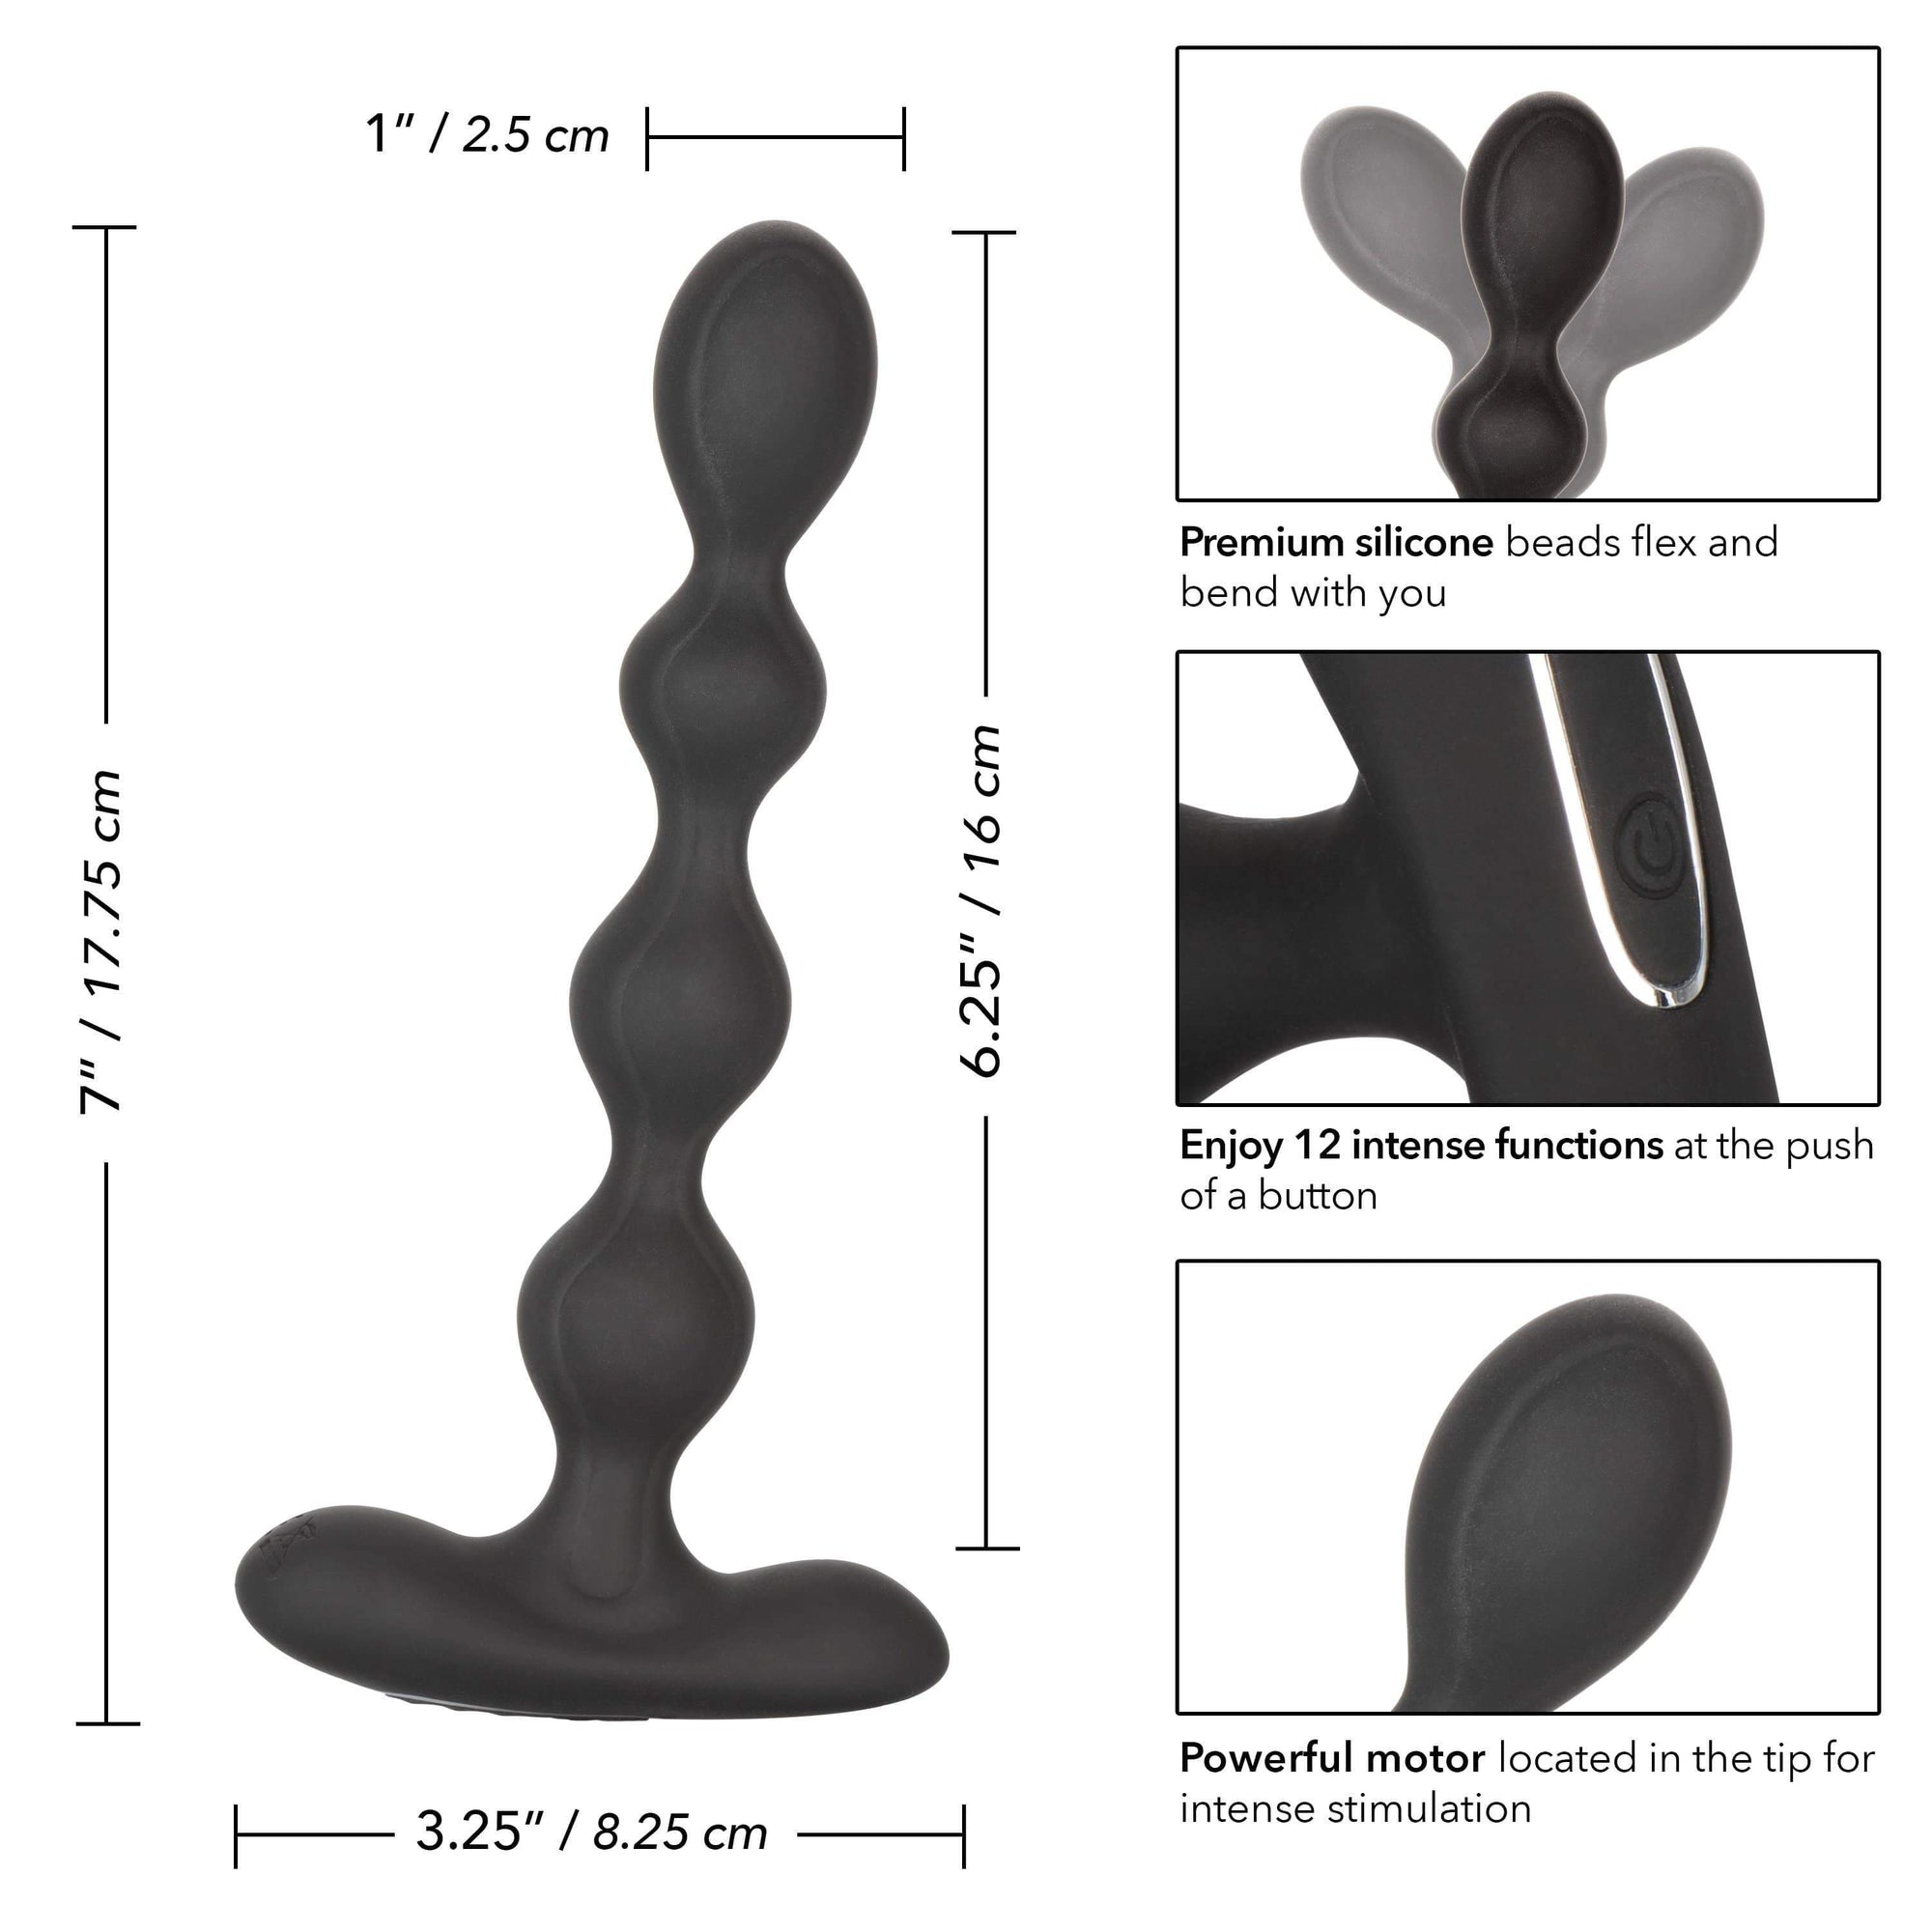 California Exotics - Eclipse Vibrating Slender Anal Beads (Black) Anal Beads (Vibration) Rechargeable